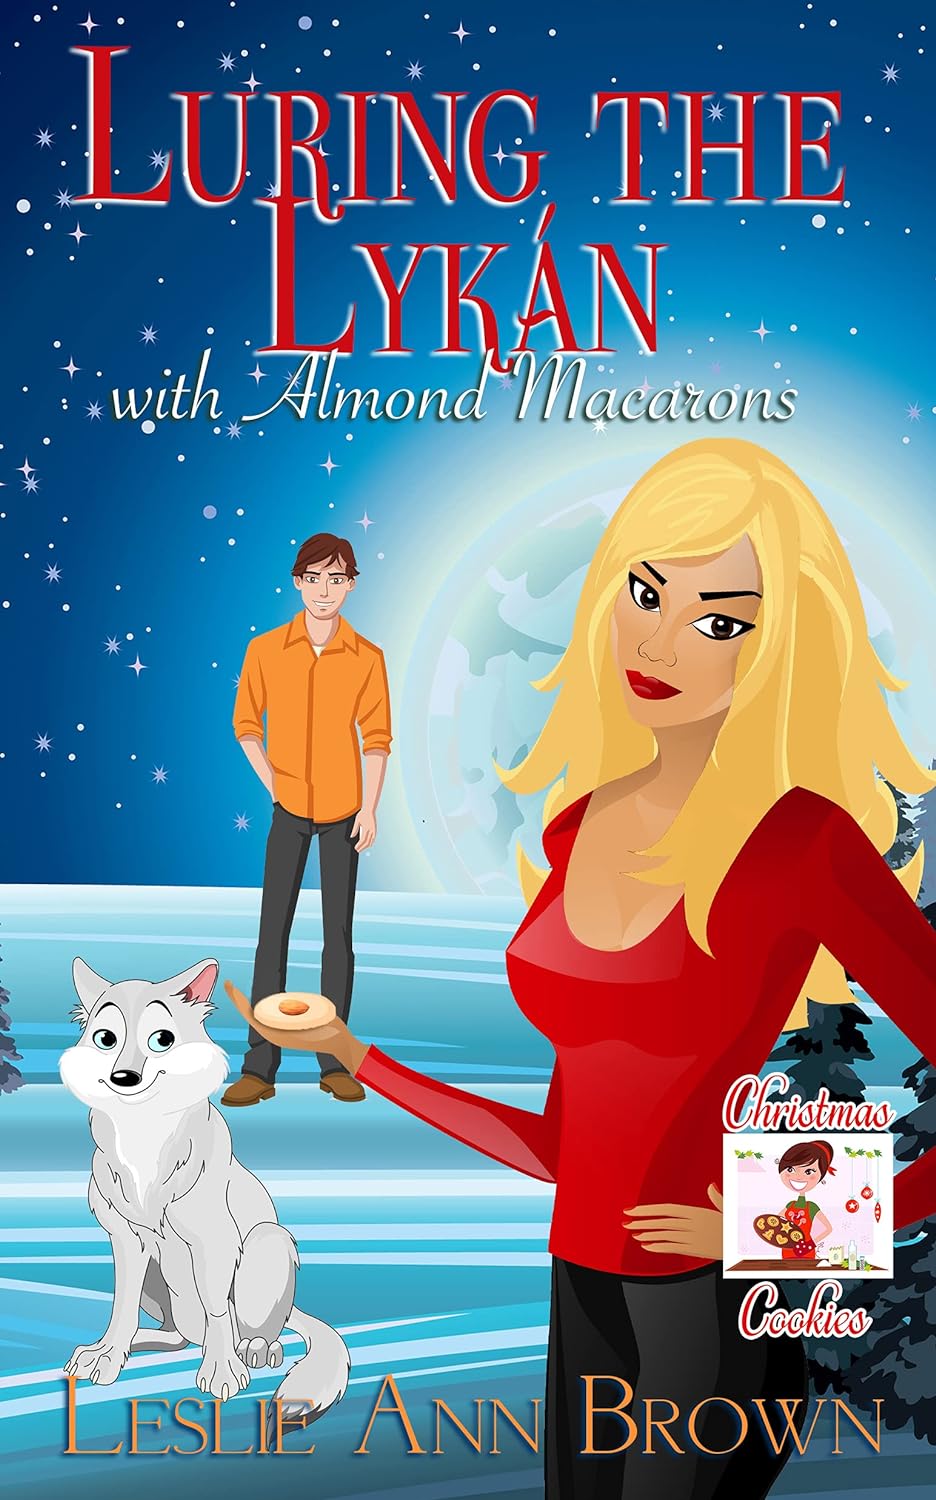 Luring the Lykán with Almond Macarons, Leslie Ann Brown, Nov, 2021